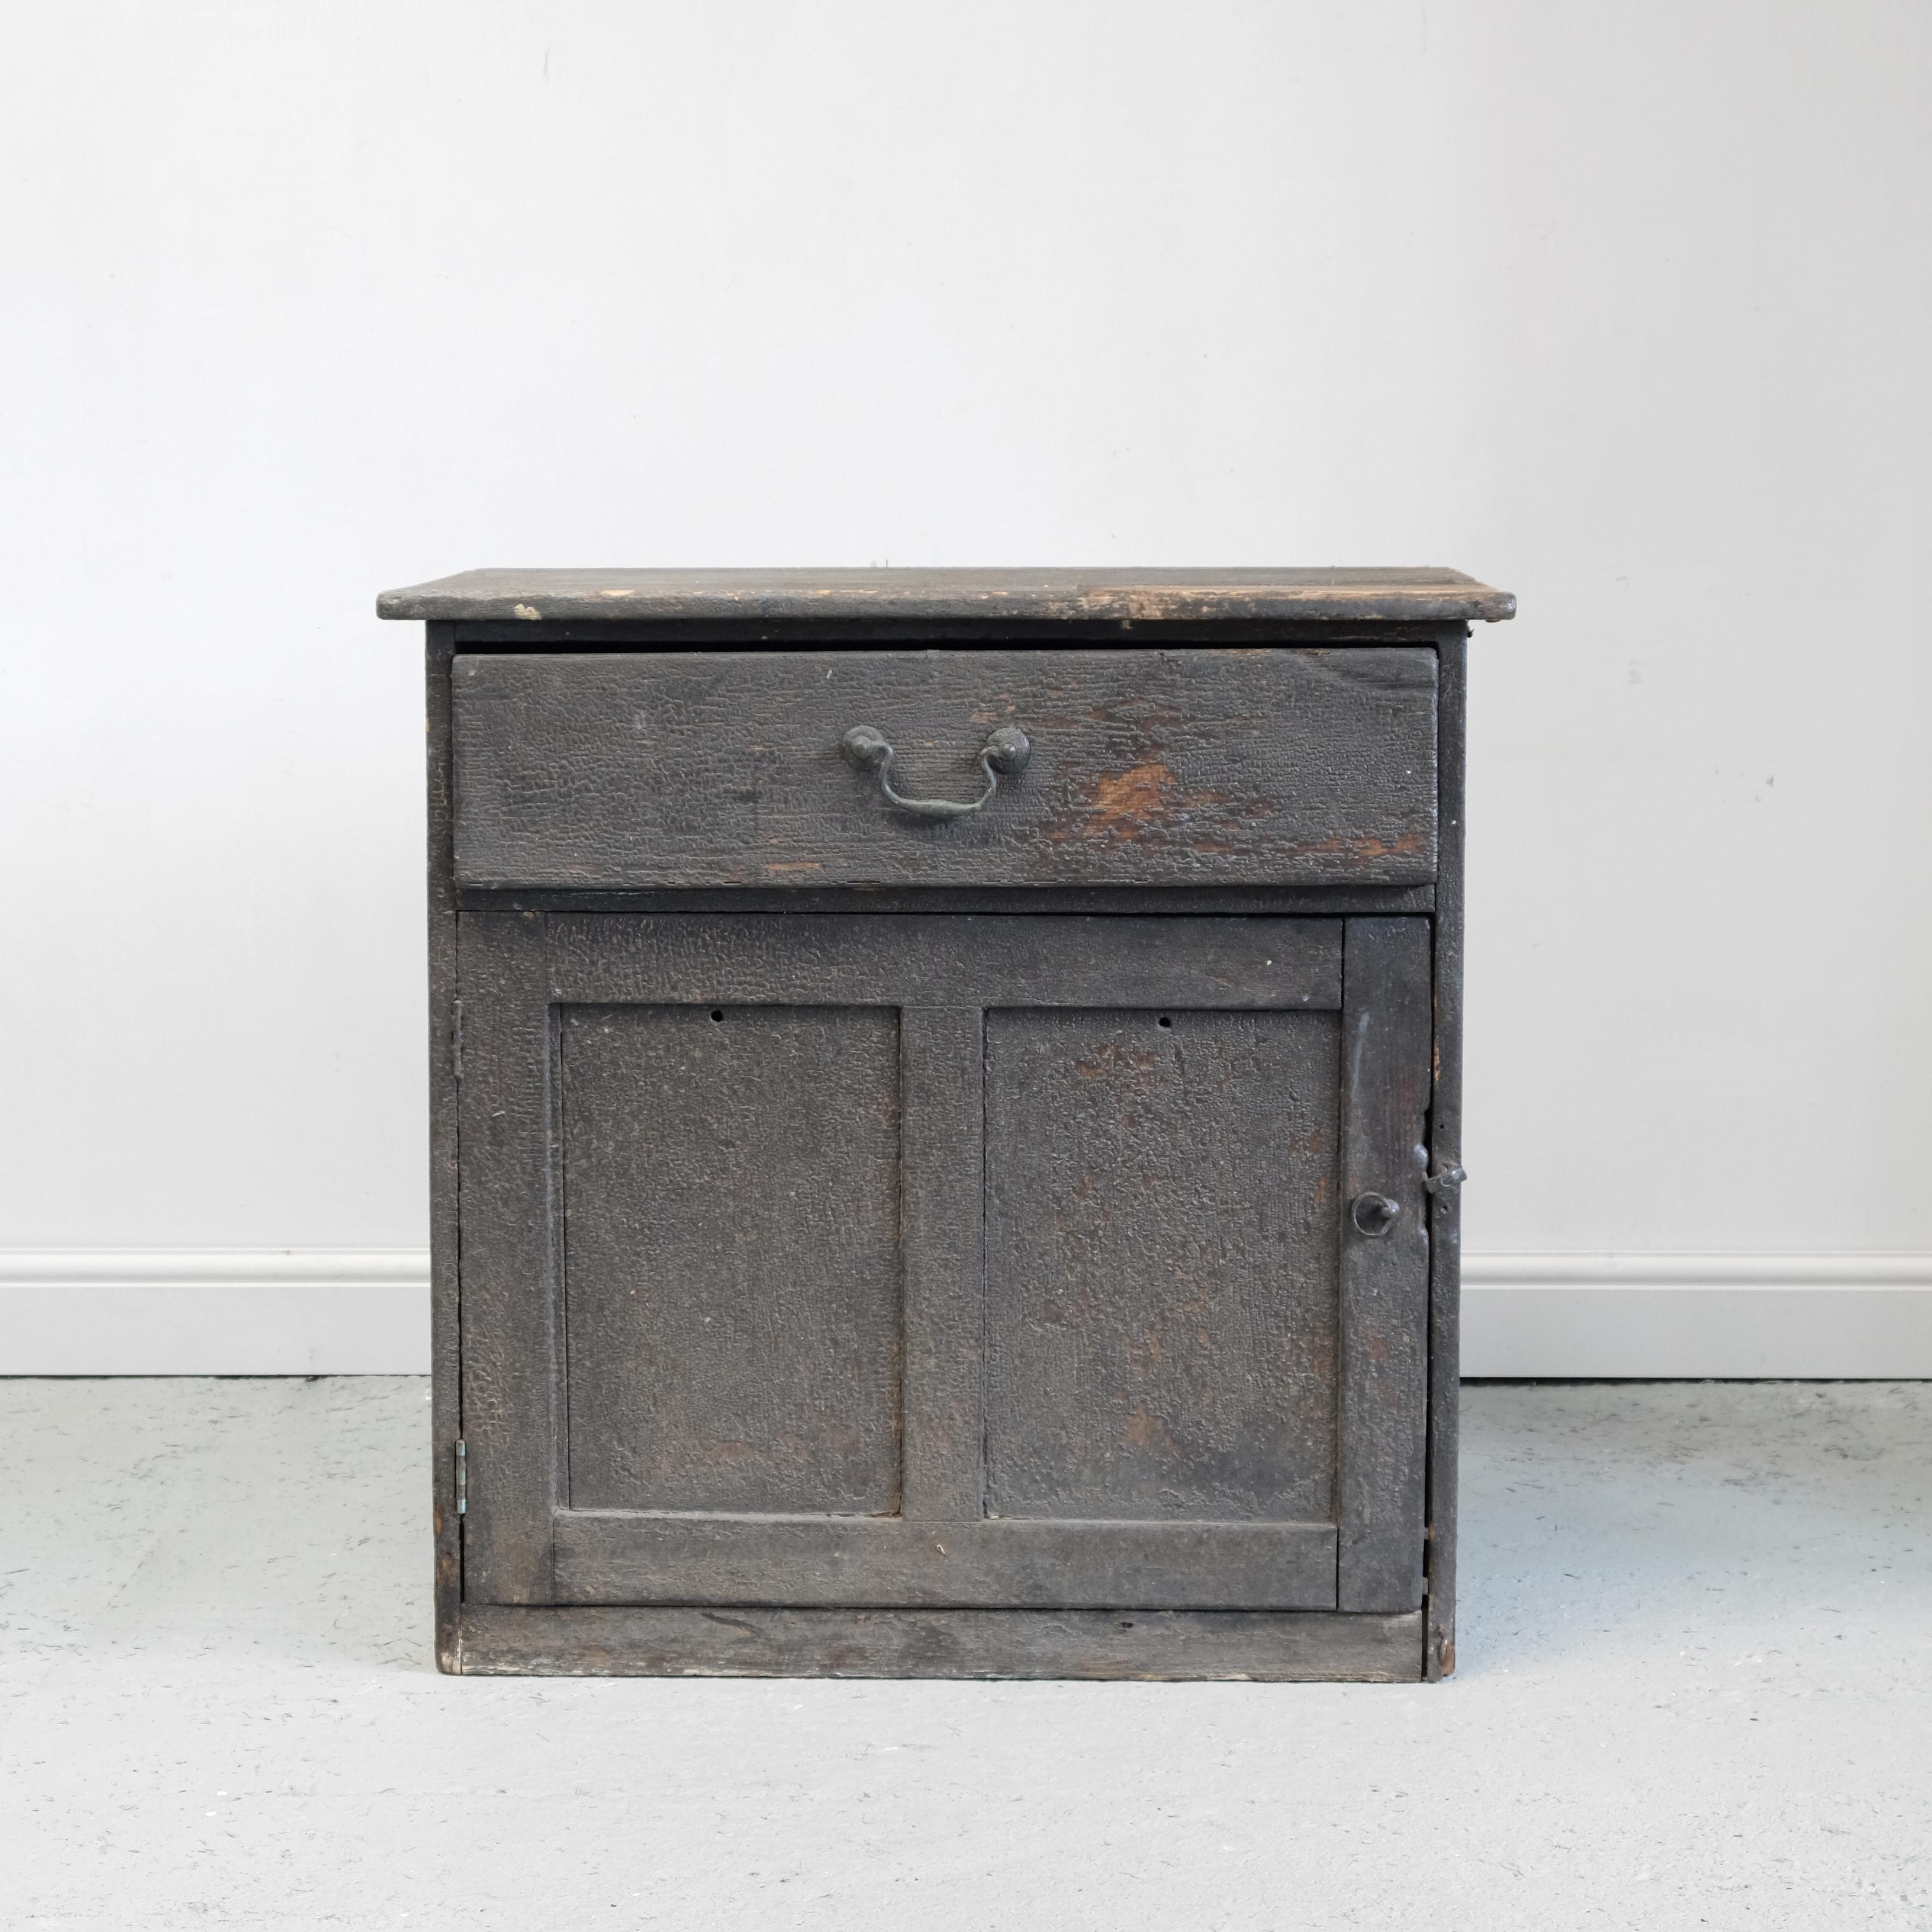 A charming 18th century estate made pine cupboard in completely un-messed with condition. It has a wonderful dry bitumen finish, original swan neck handle and paneled door and sides. The top has an area where there would once have been a carpenter’s